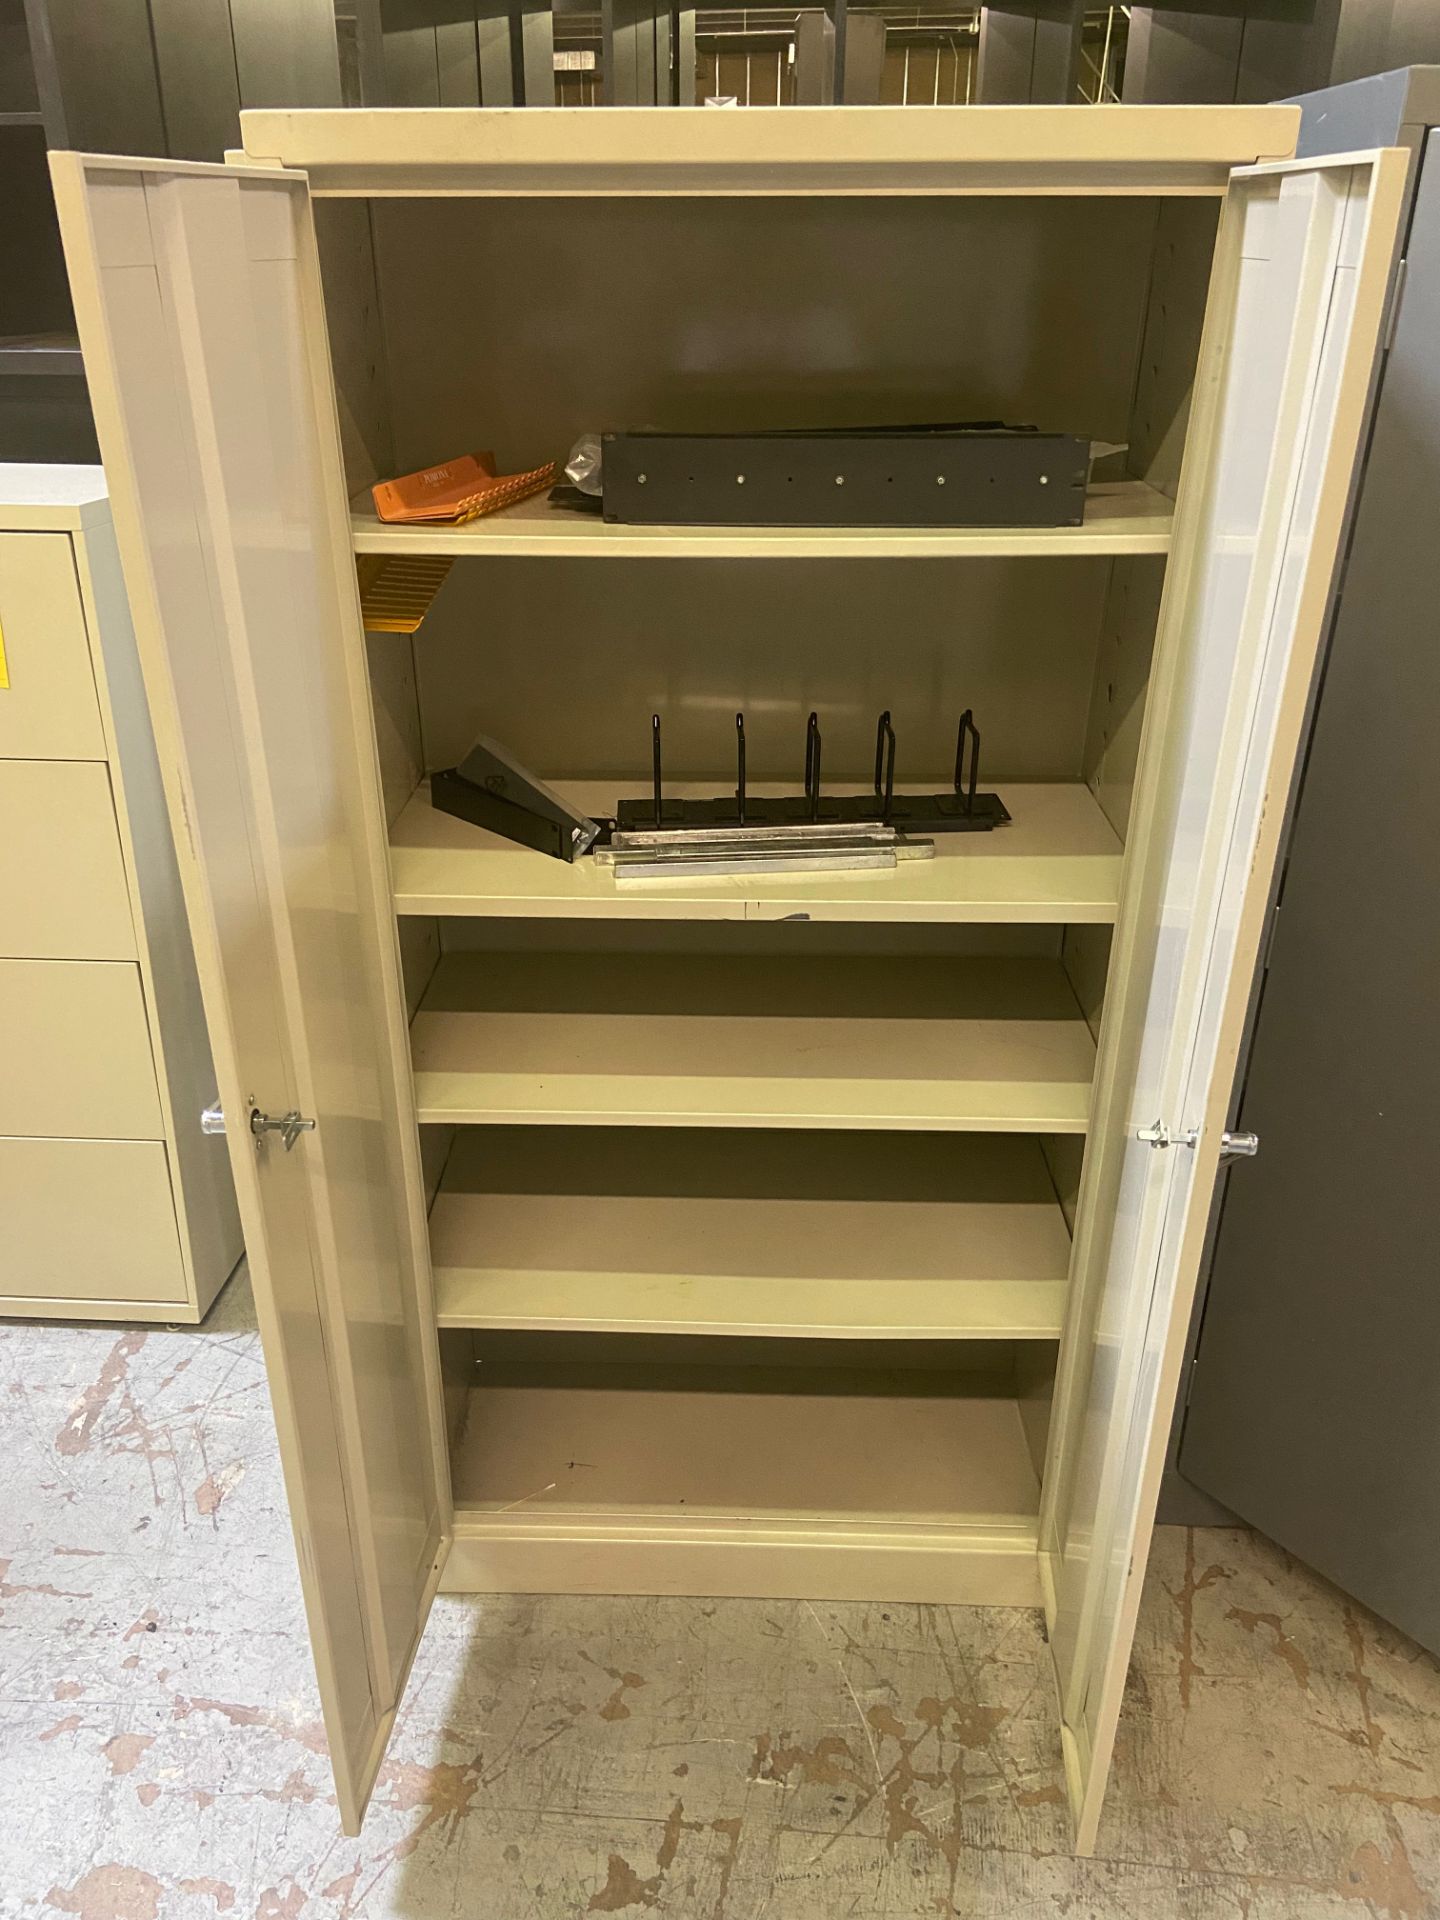 Cabinet and Contents (See Photos), Rigging Fee: $50